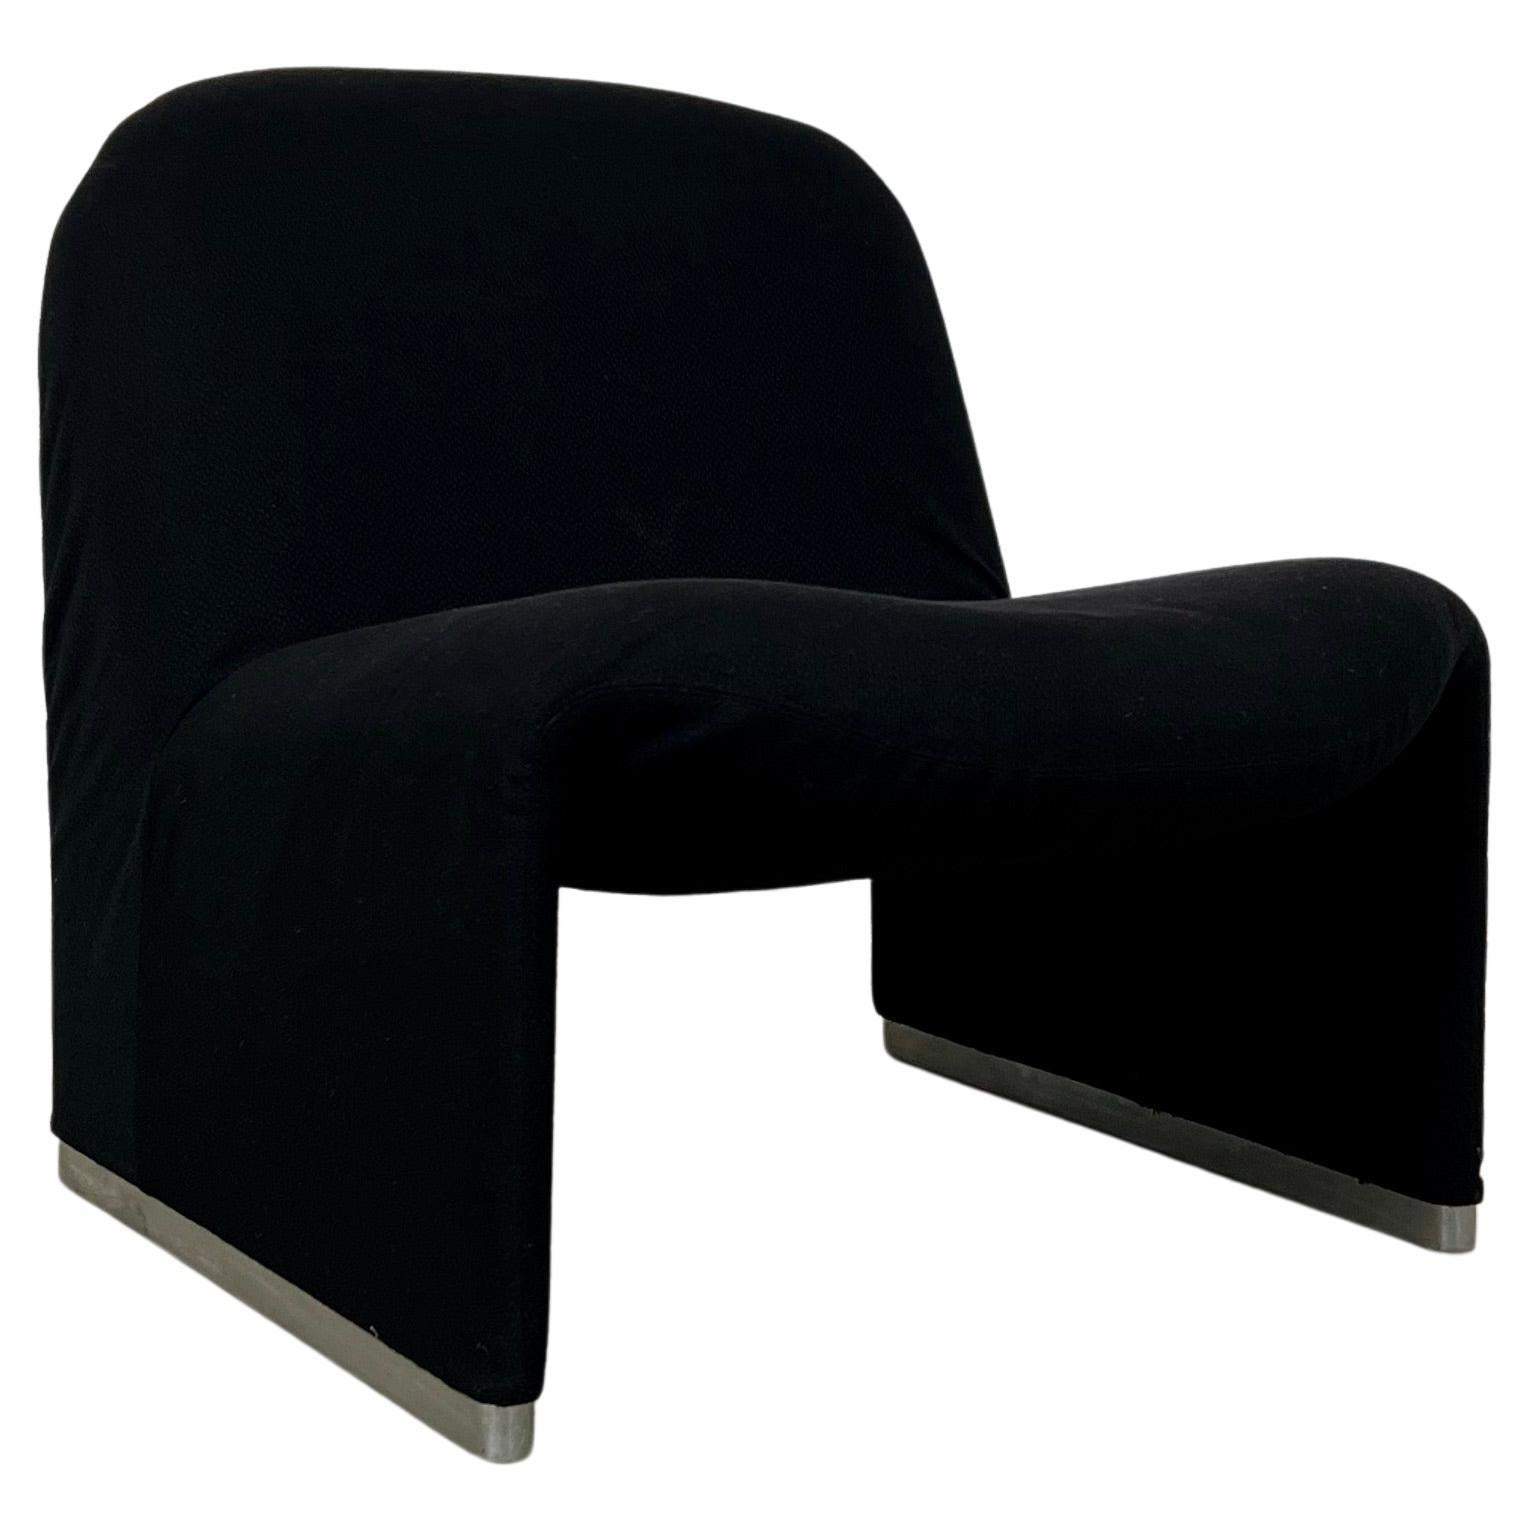 Alky Chair by Giancarlo Piretti for Anonima Castelli, 1970s